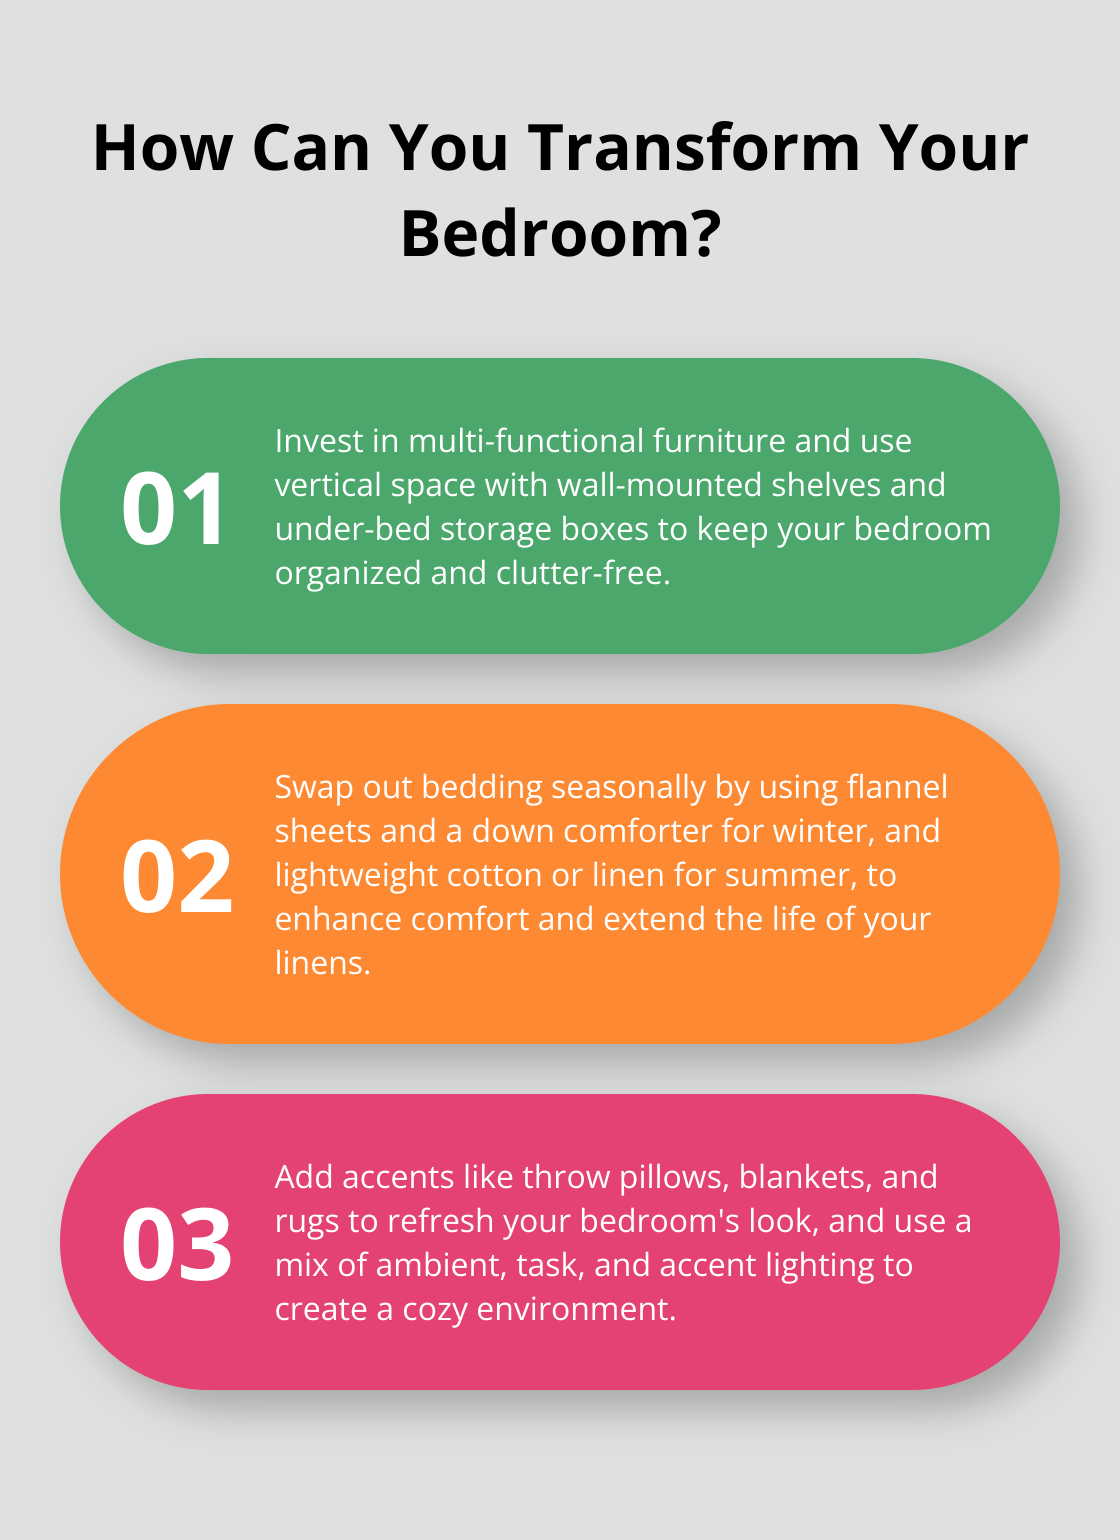 Fact - How Can You Transform Your Bedroom?